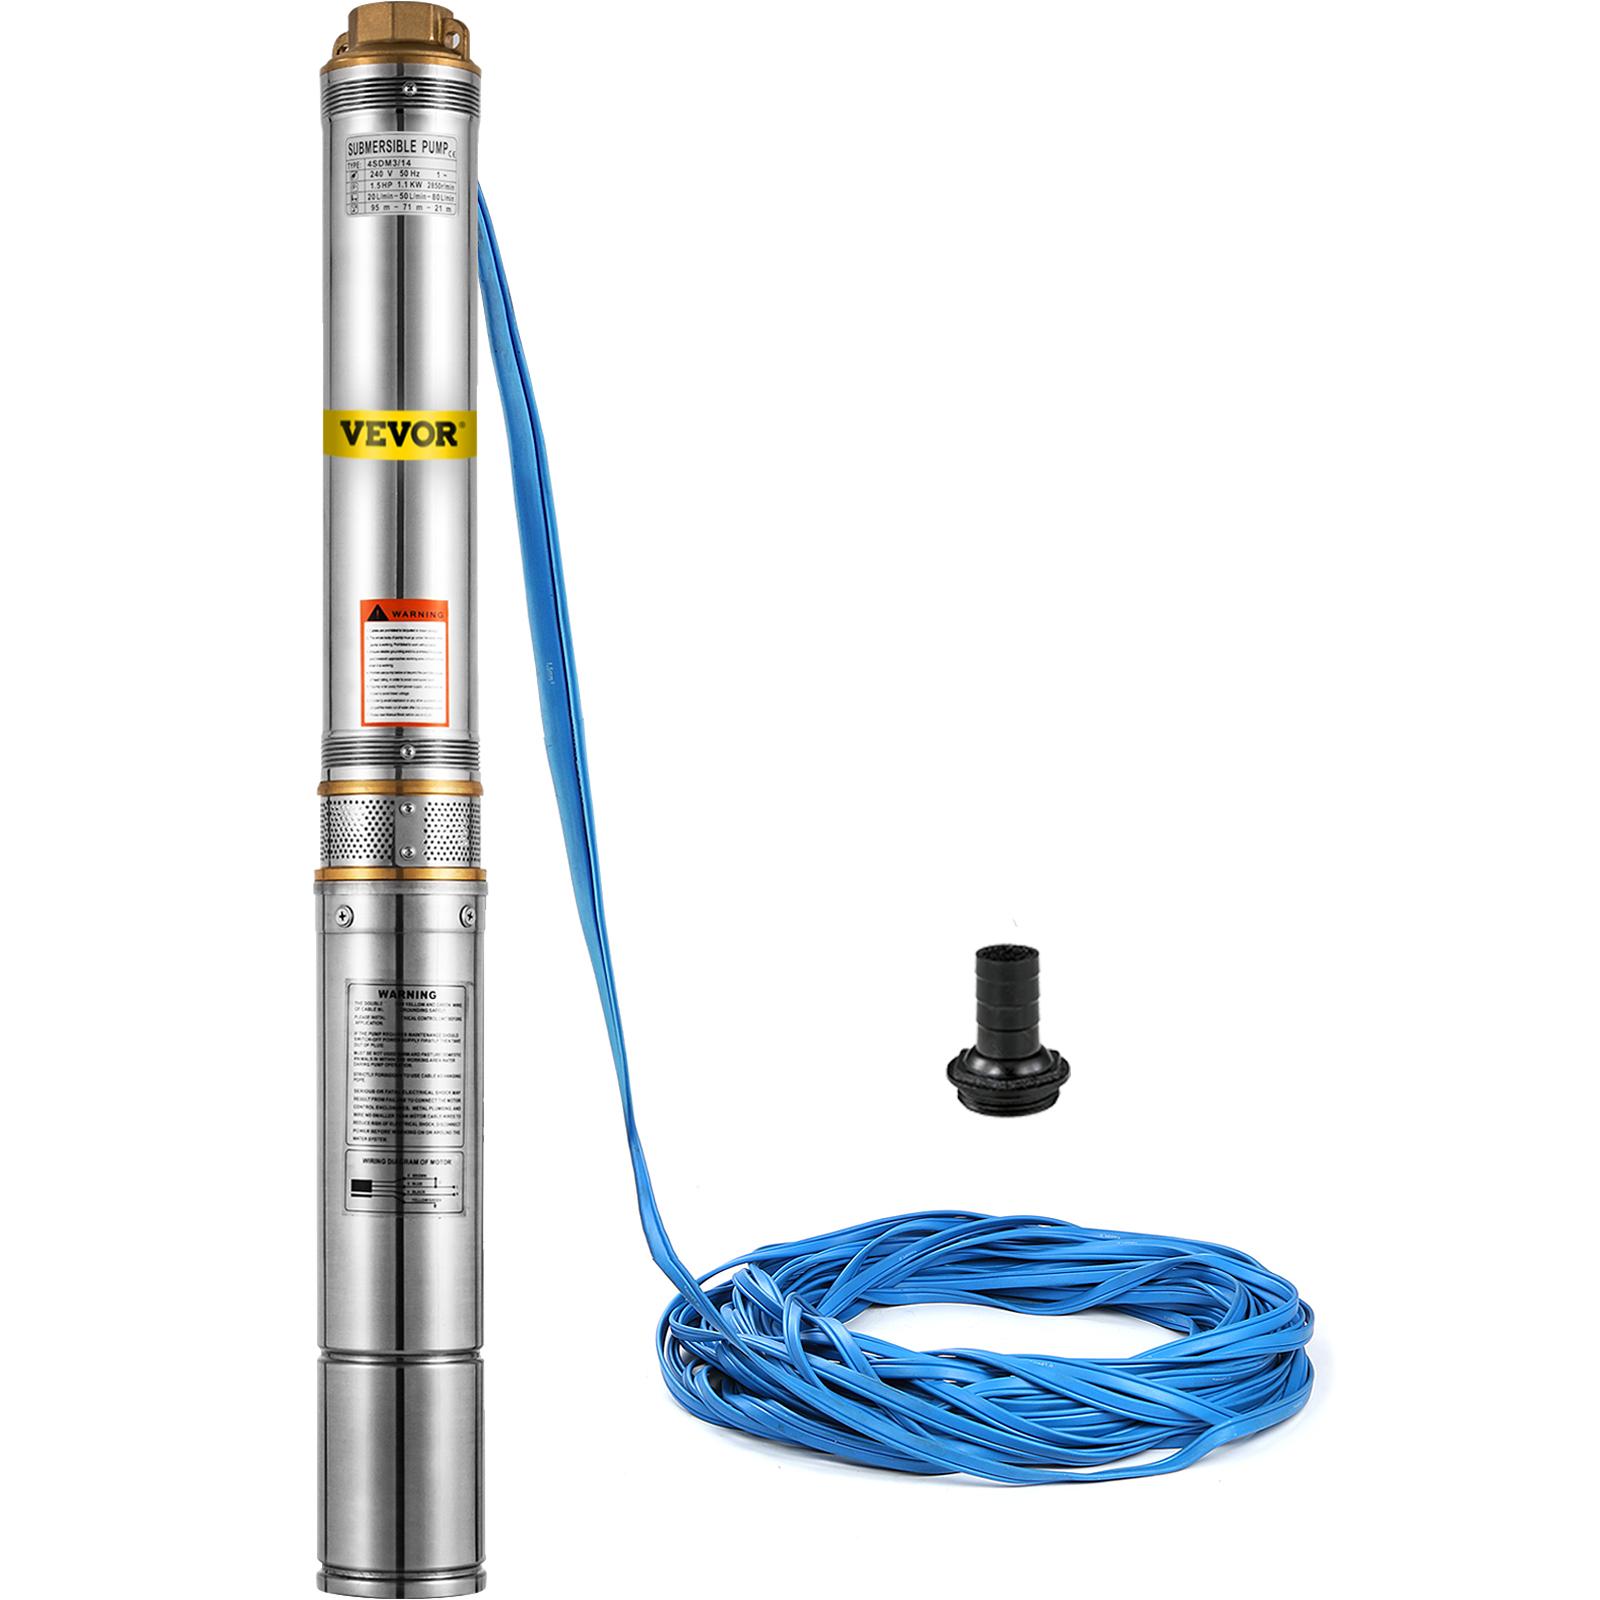 Vevor Submersible Well Pump, Deep Well Pump 24gpm 380 Ft, 1.5hp Stainless Steel от Vevor Many GEOs